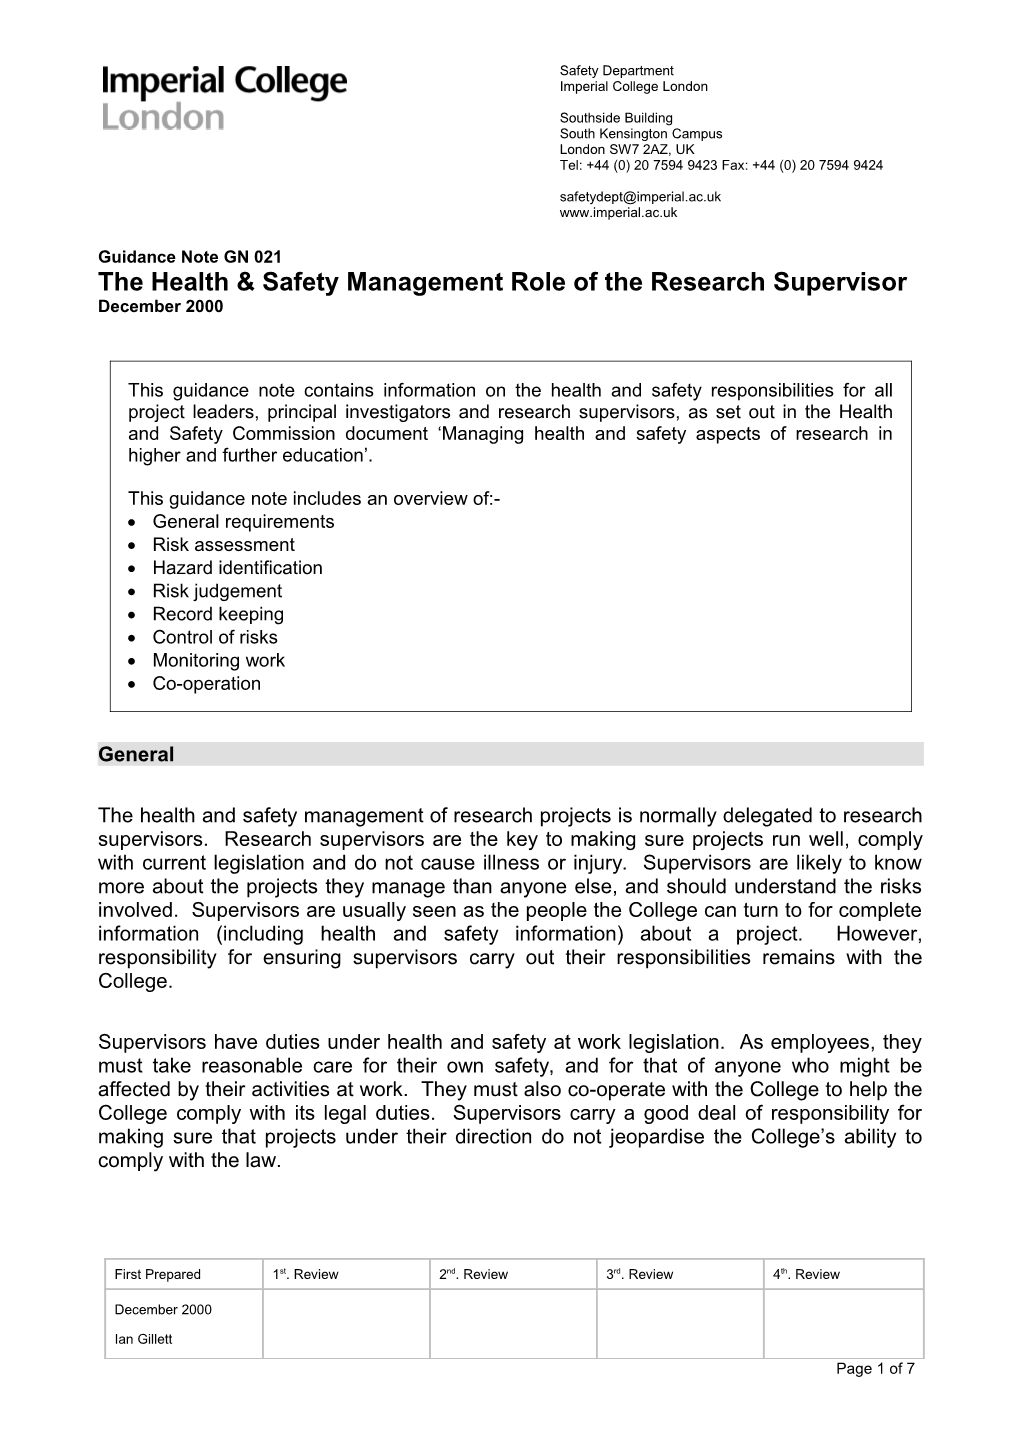 The Health & Safety Management Role of the Research Supervisor